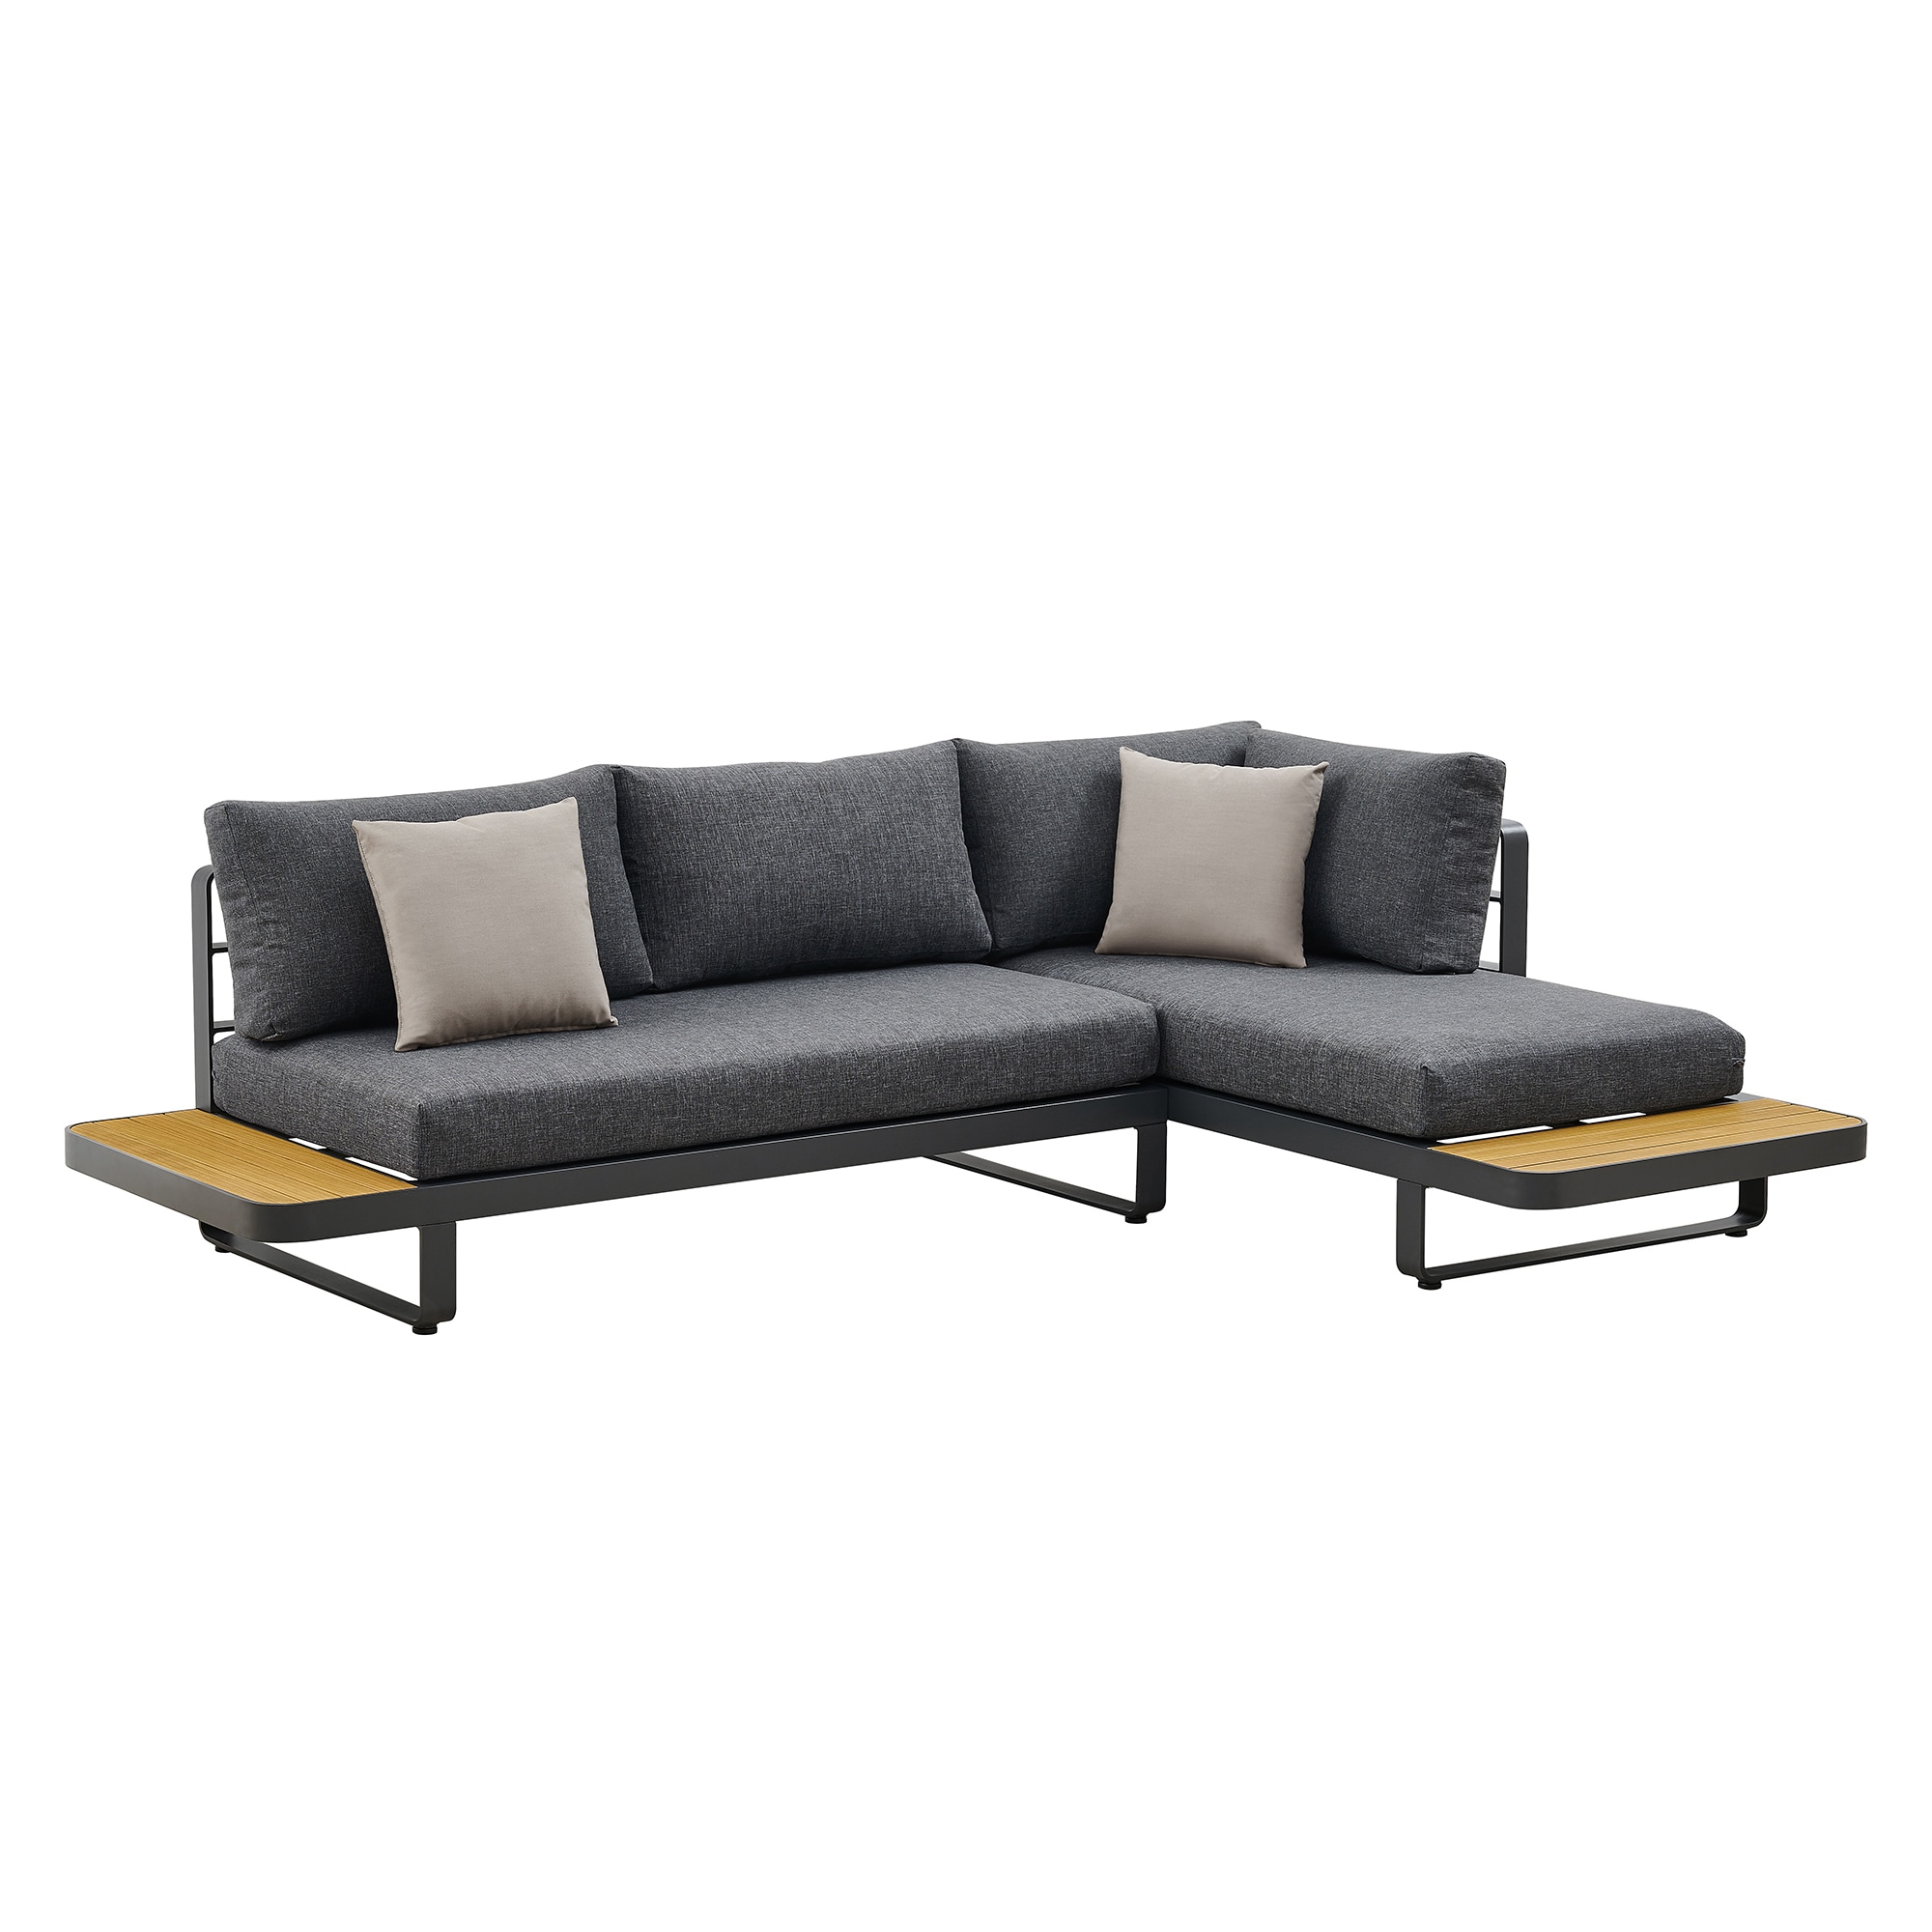 uitdrukking Sanders Gedwongen OVE Decors Caribbean Outdoor Sectional with Gray Cushion(S) and Aluminum  Frame in the Patio Sectionals & Sofas department at Lowes.com